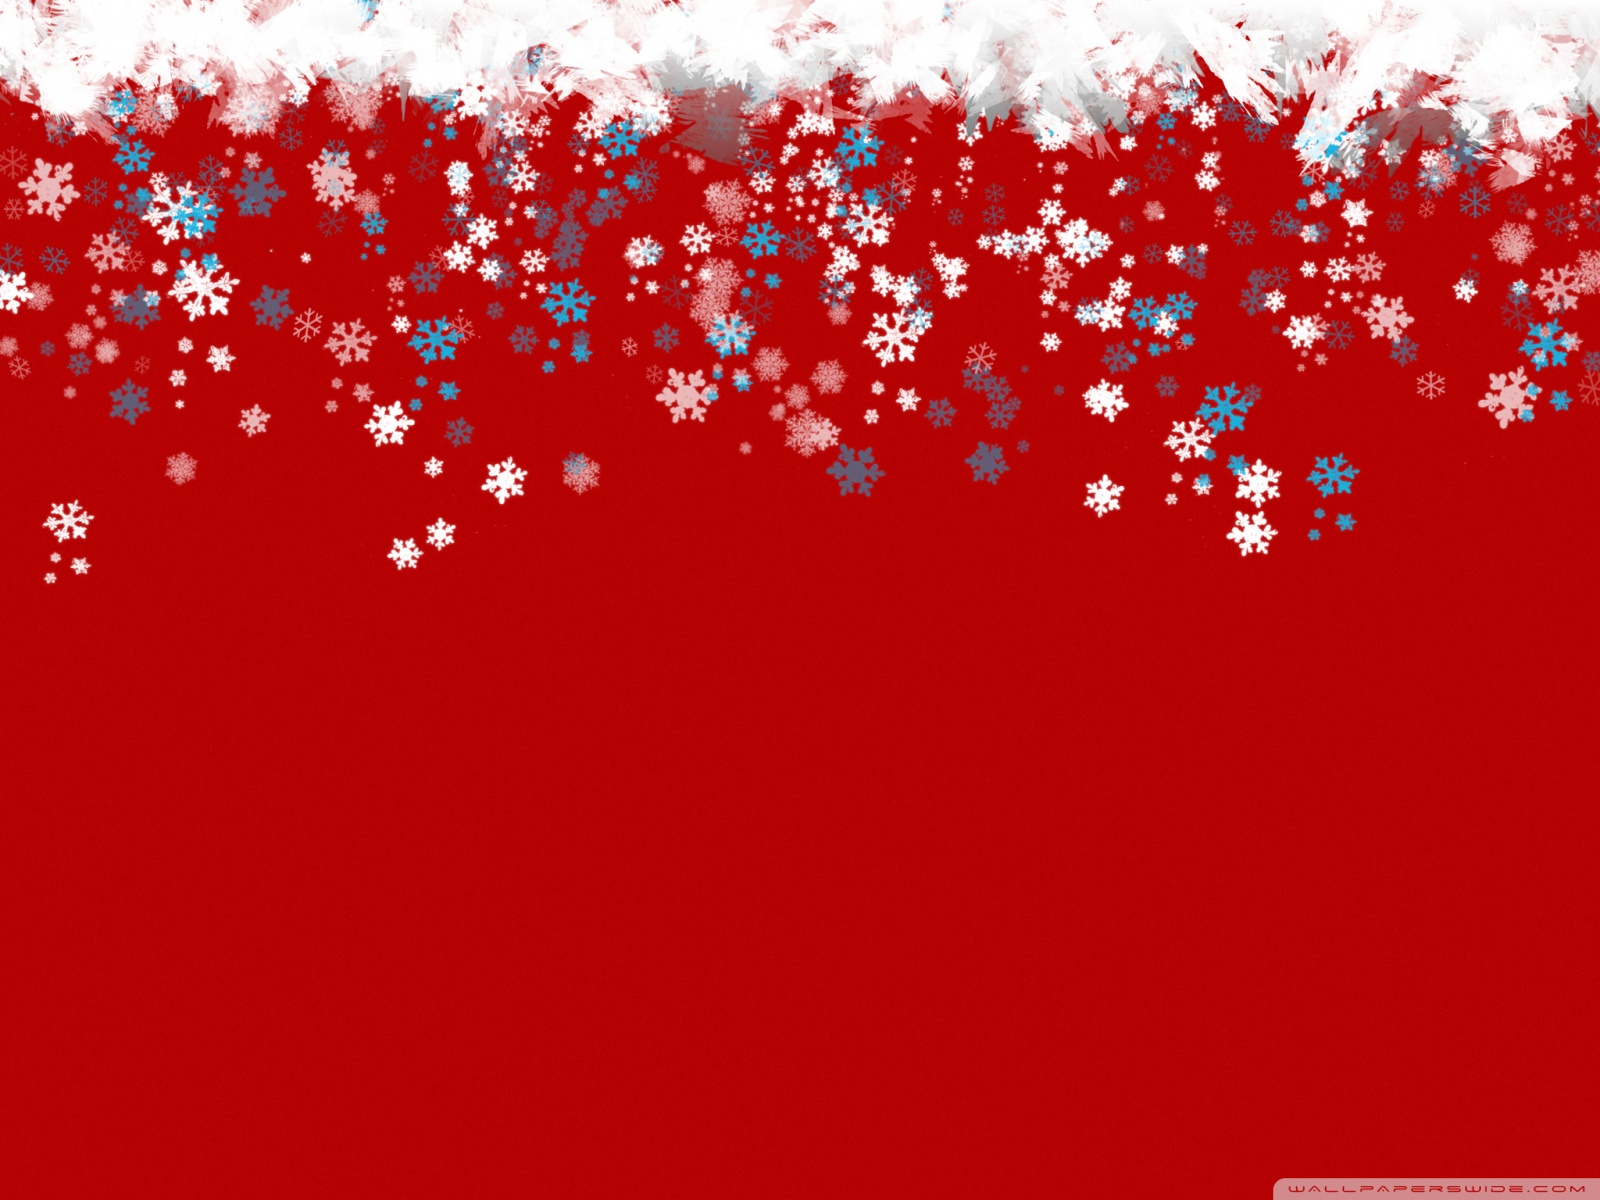 Download 21 blue-snowflake-wallpaper Snowflake-Background-1920x1080-Cartoon-Snow-Background-.png